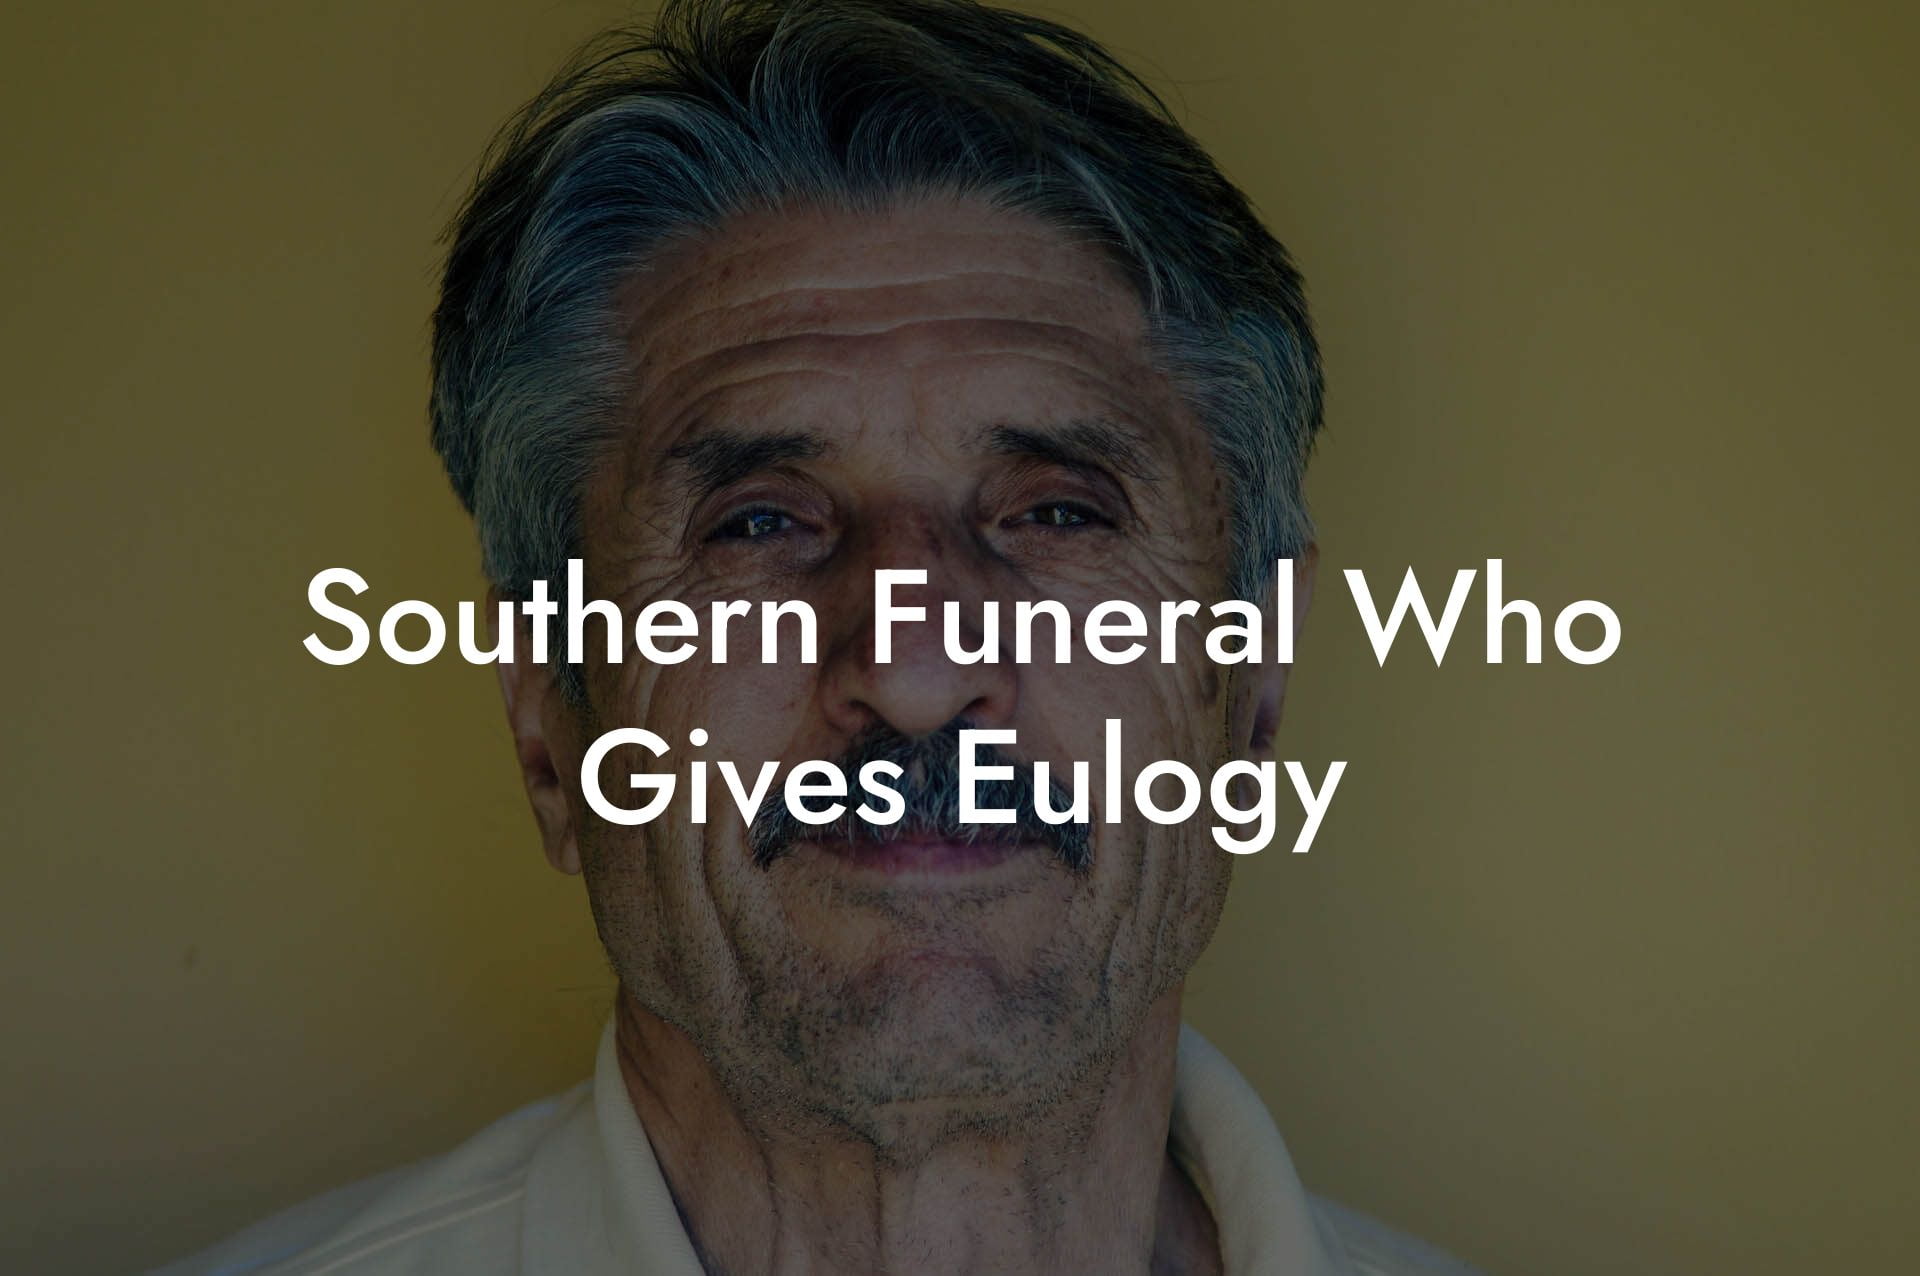 Southern Funeral Who Gives Eulogy